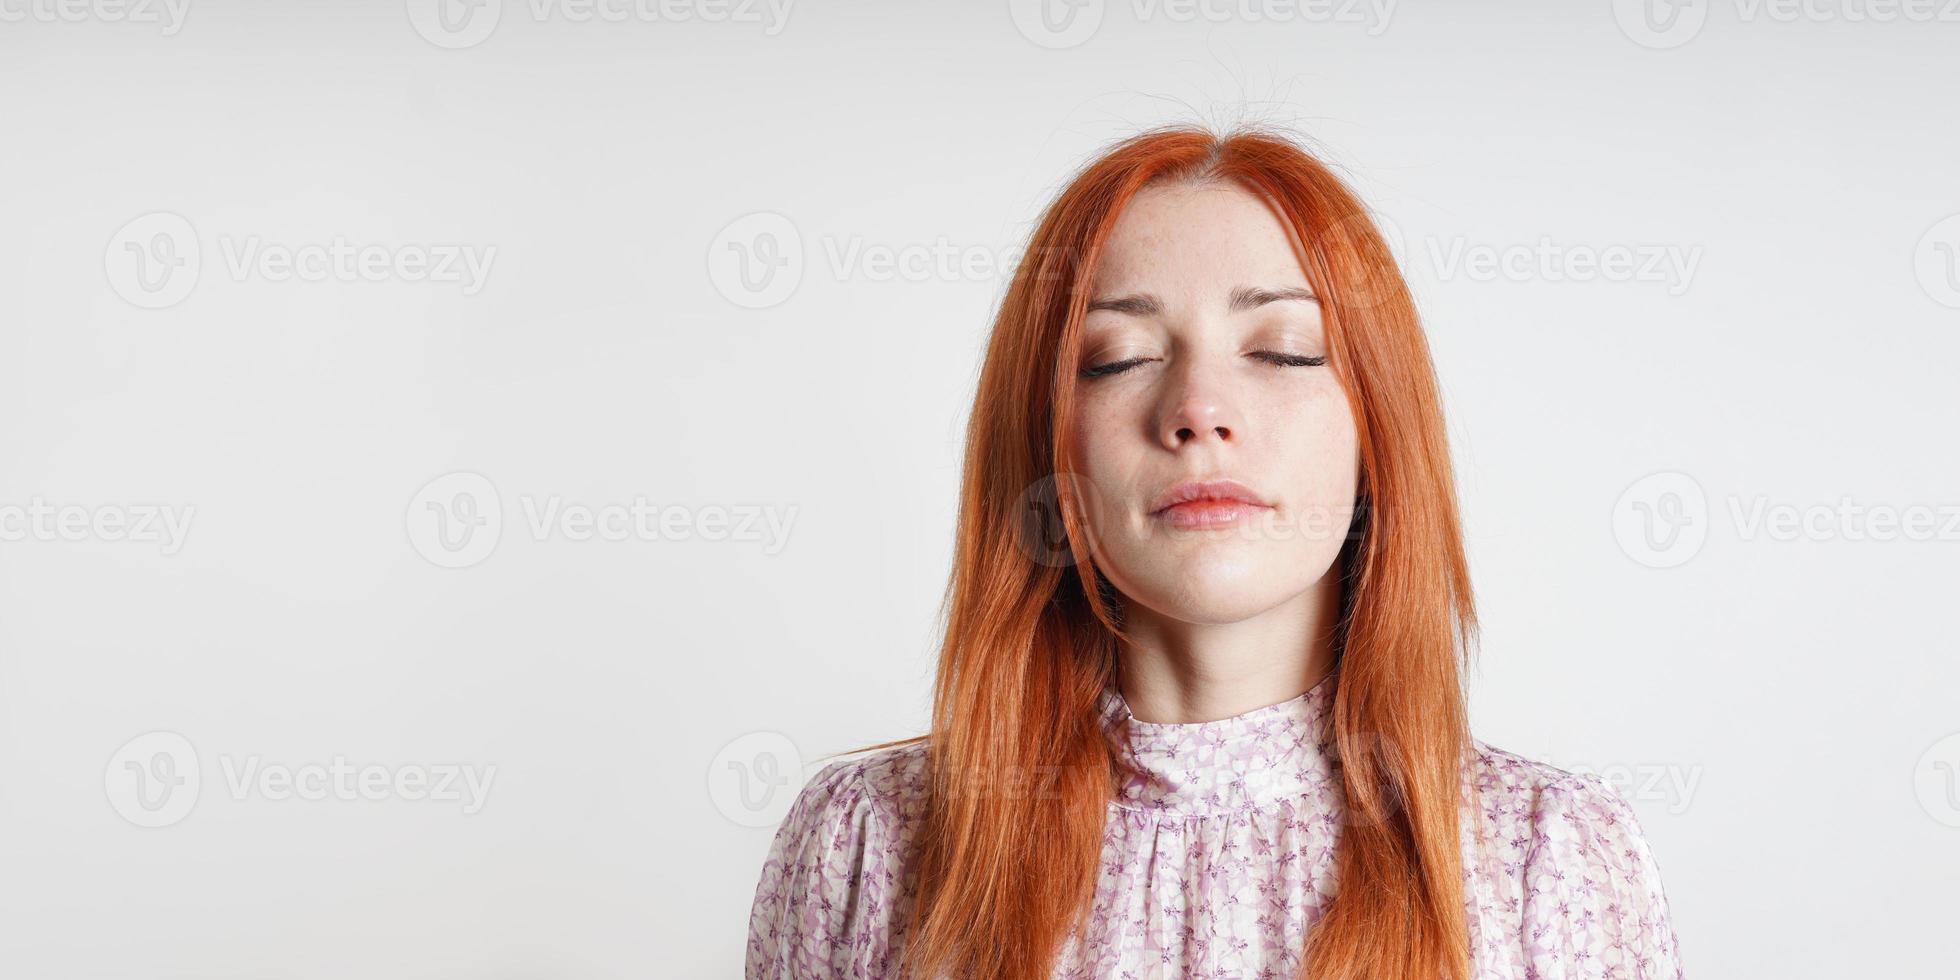 Calm peaceful woman meditates with closed eyes - introspection mindfulness and self-care photo